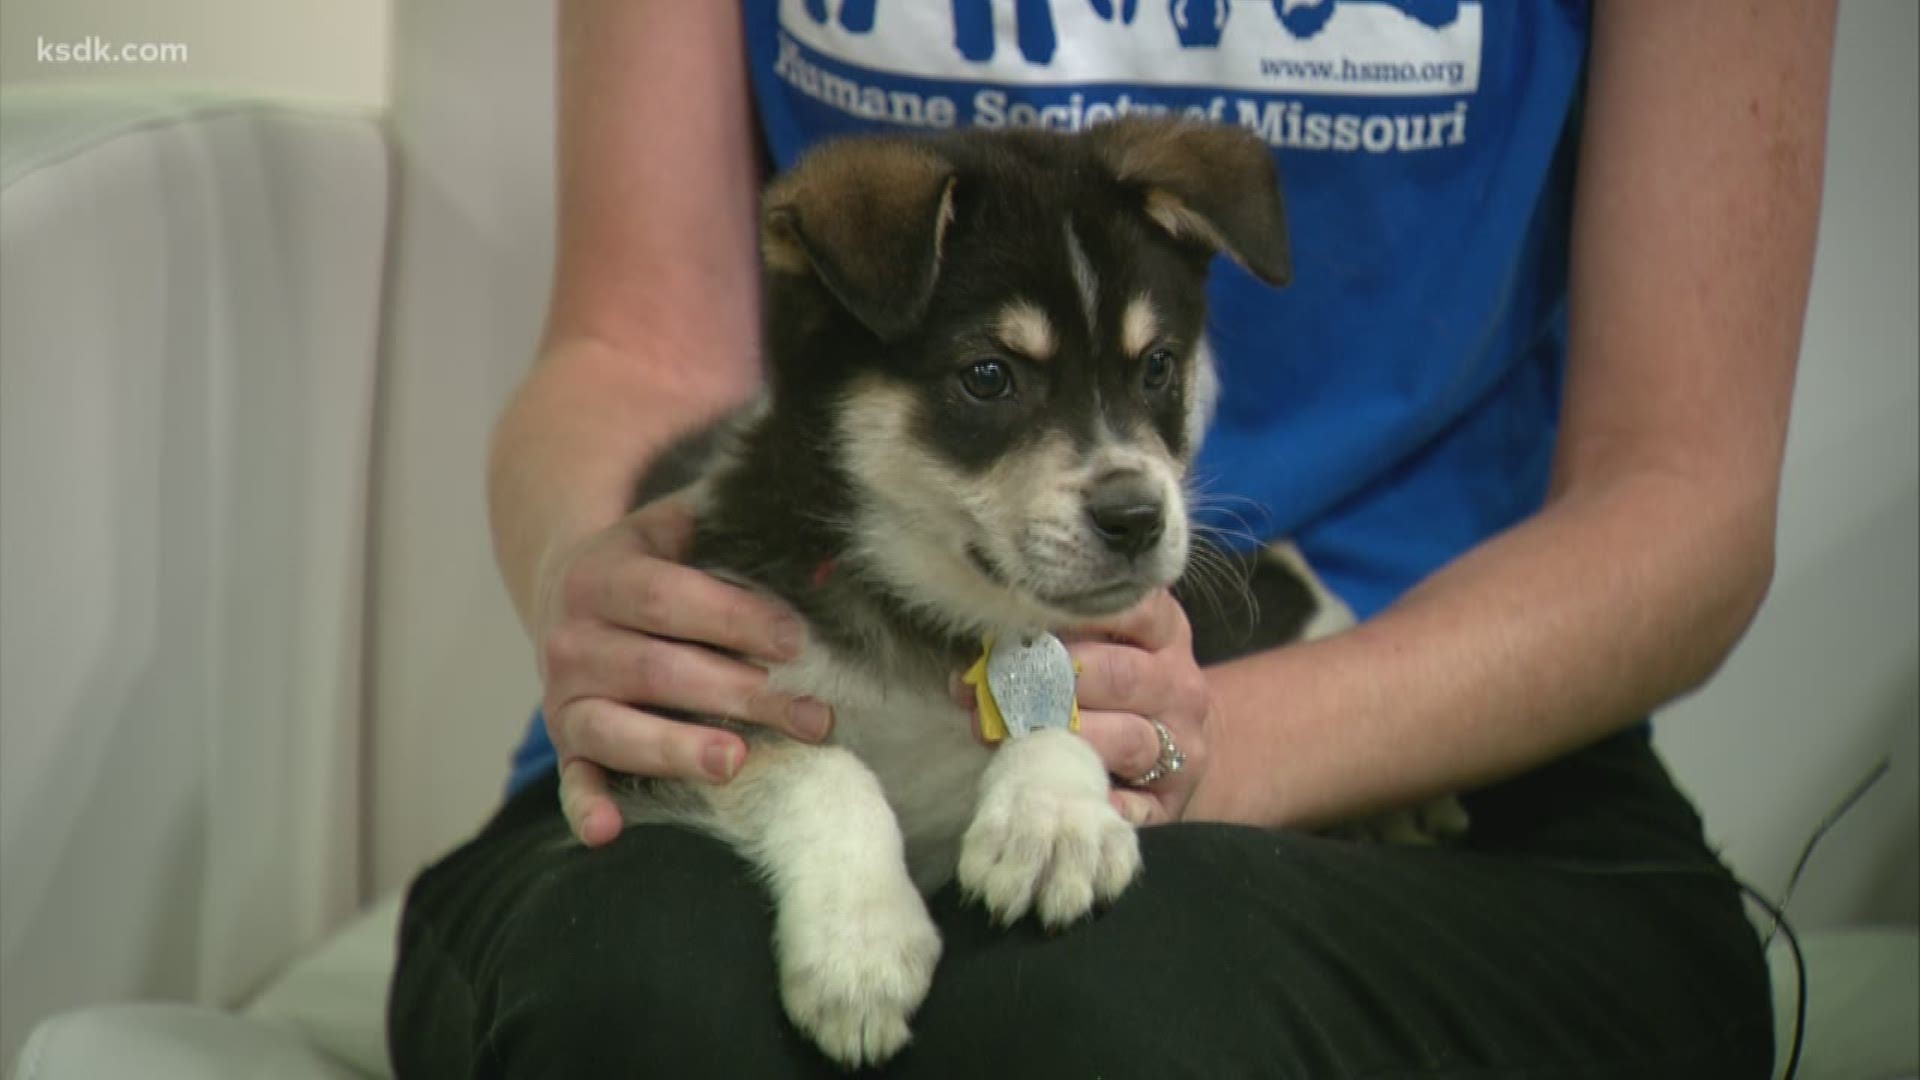 Tune in tonight for the Humane Society of Missouri’s Second Chances Telethon at 8PM!